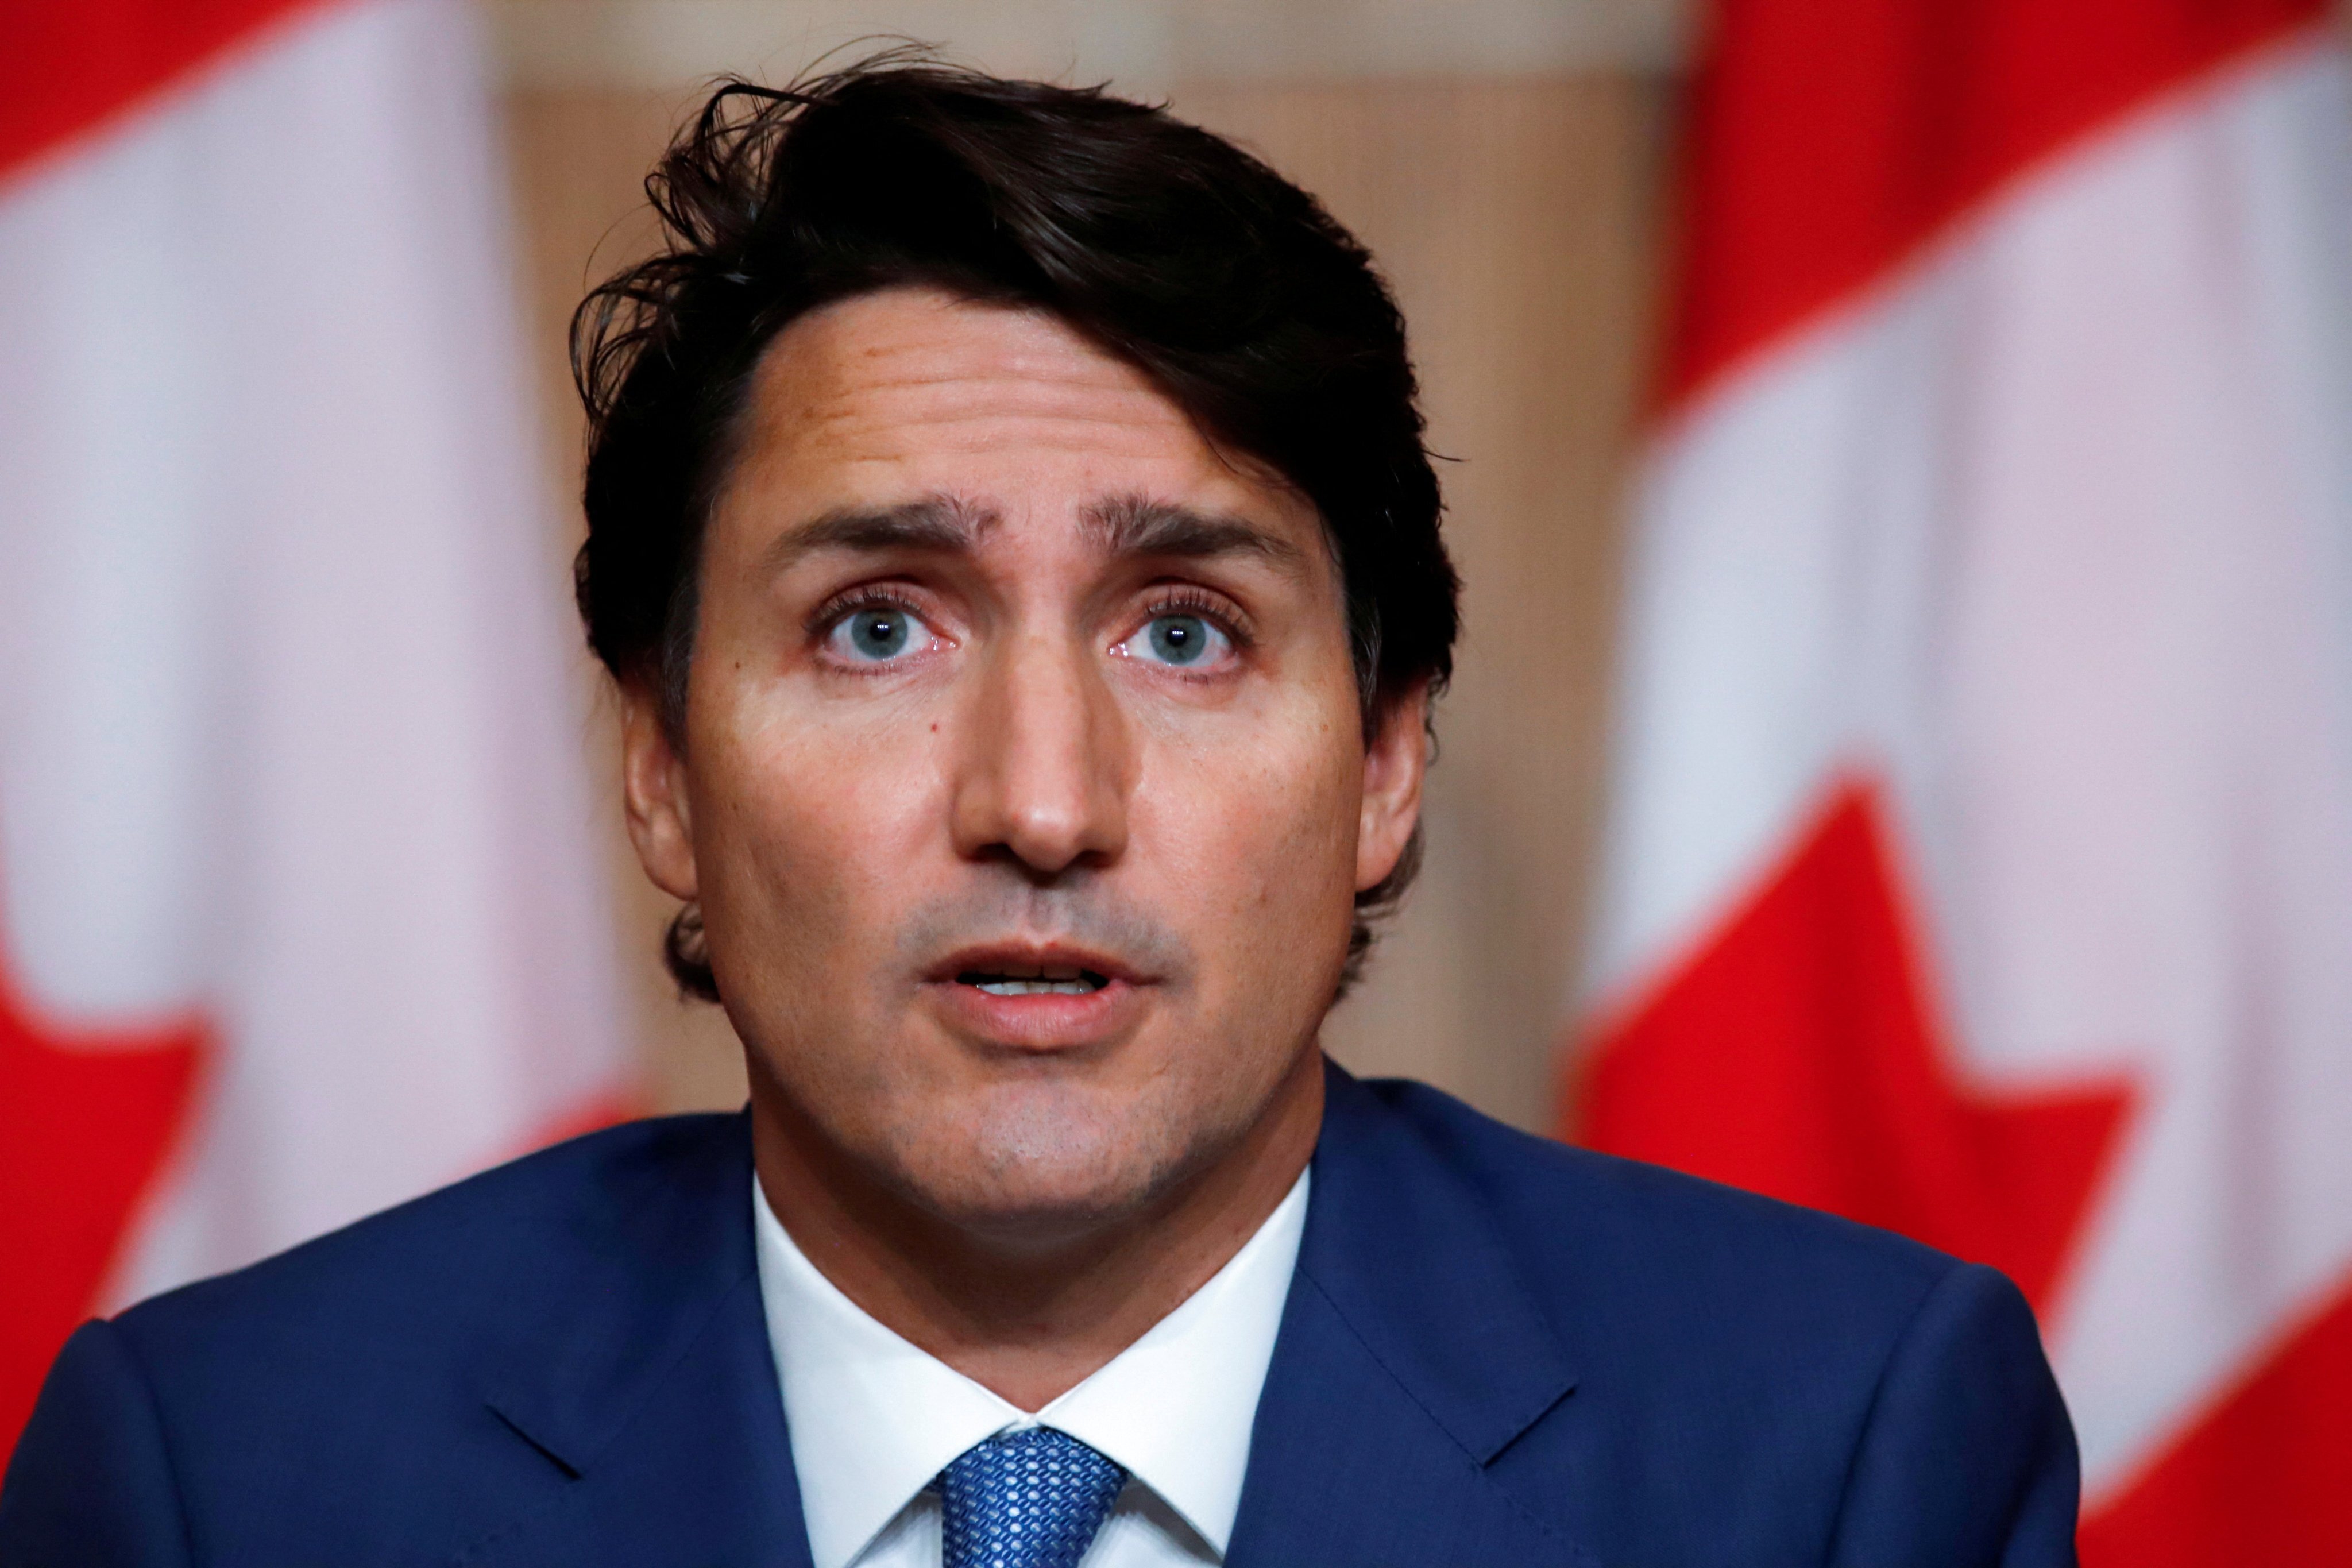 Canada’s Prime Minister Justin Trudeau speaks during a news conference in Ottawa in October. Photo: Reuters